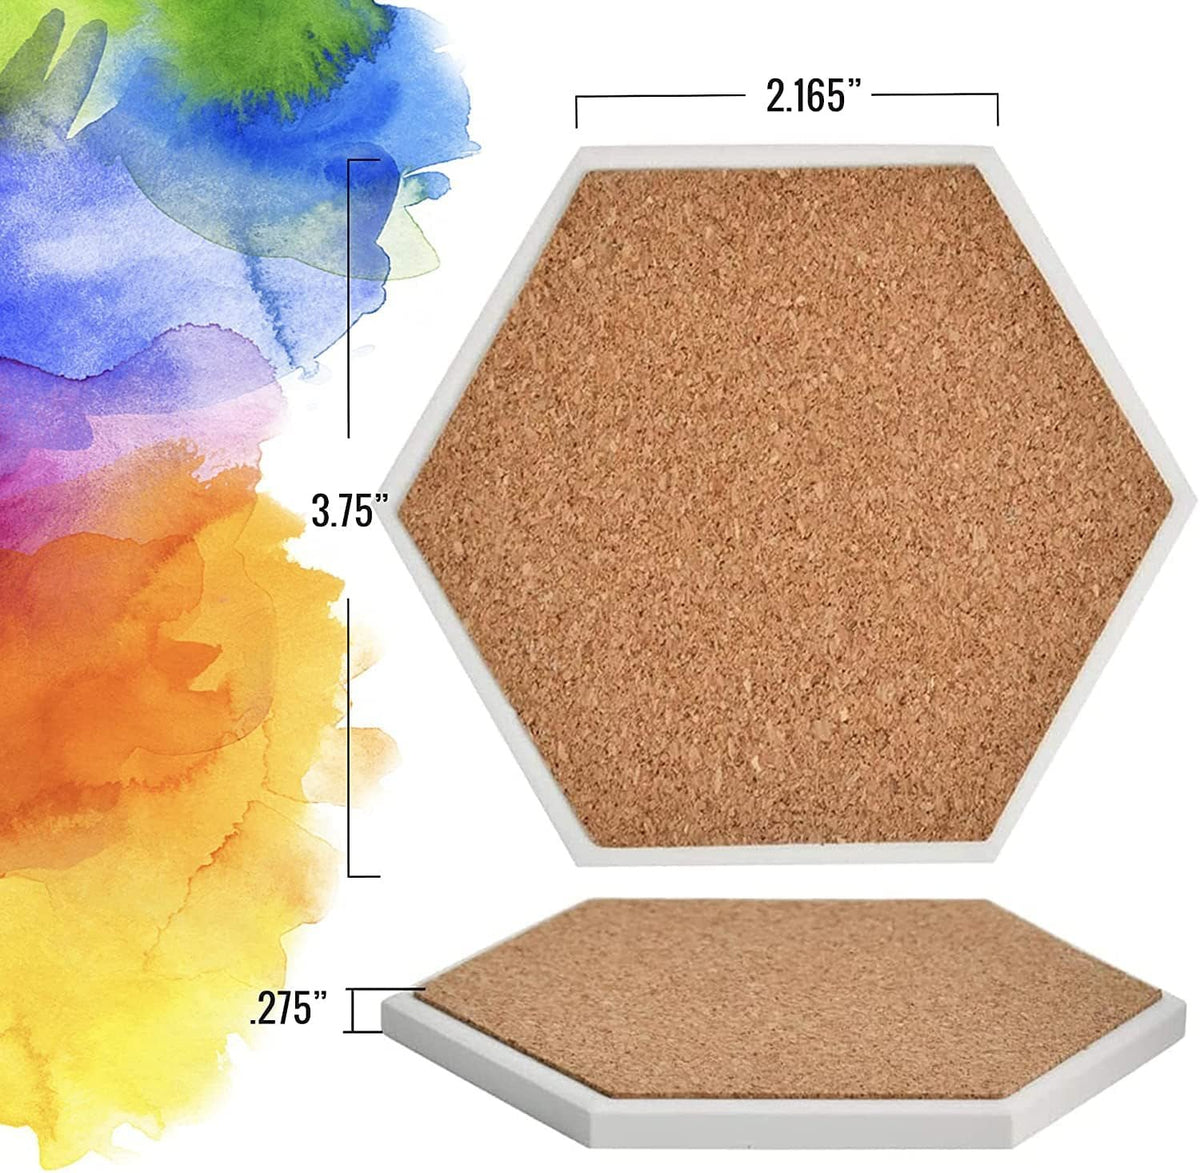 Pixiss Ceramic Tiles for Crafts Coasters,12 Ceramic White Tiles Unglazed 4x4 with Cork Backing Pads, Use with Alcohol Ink or Acrylic Pouring, DIY Make